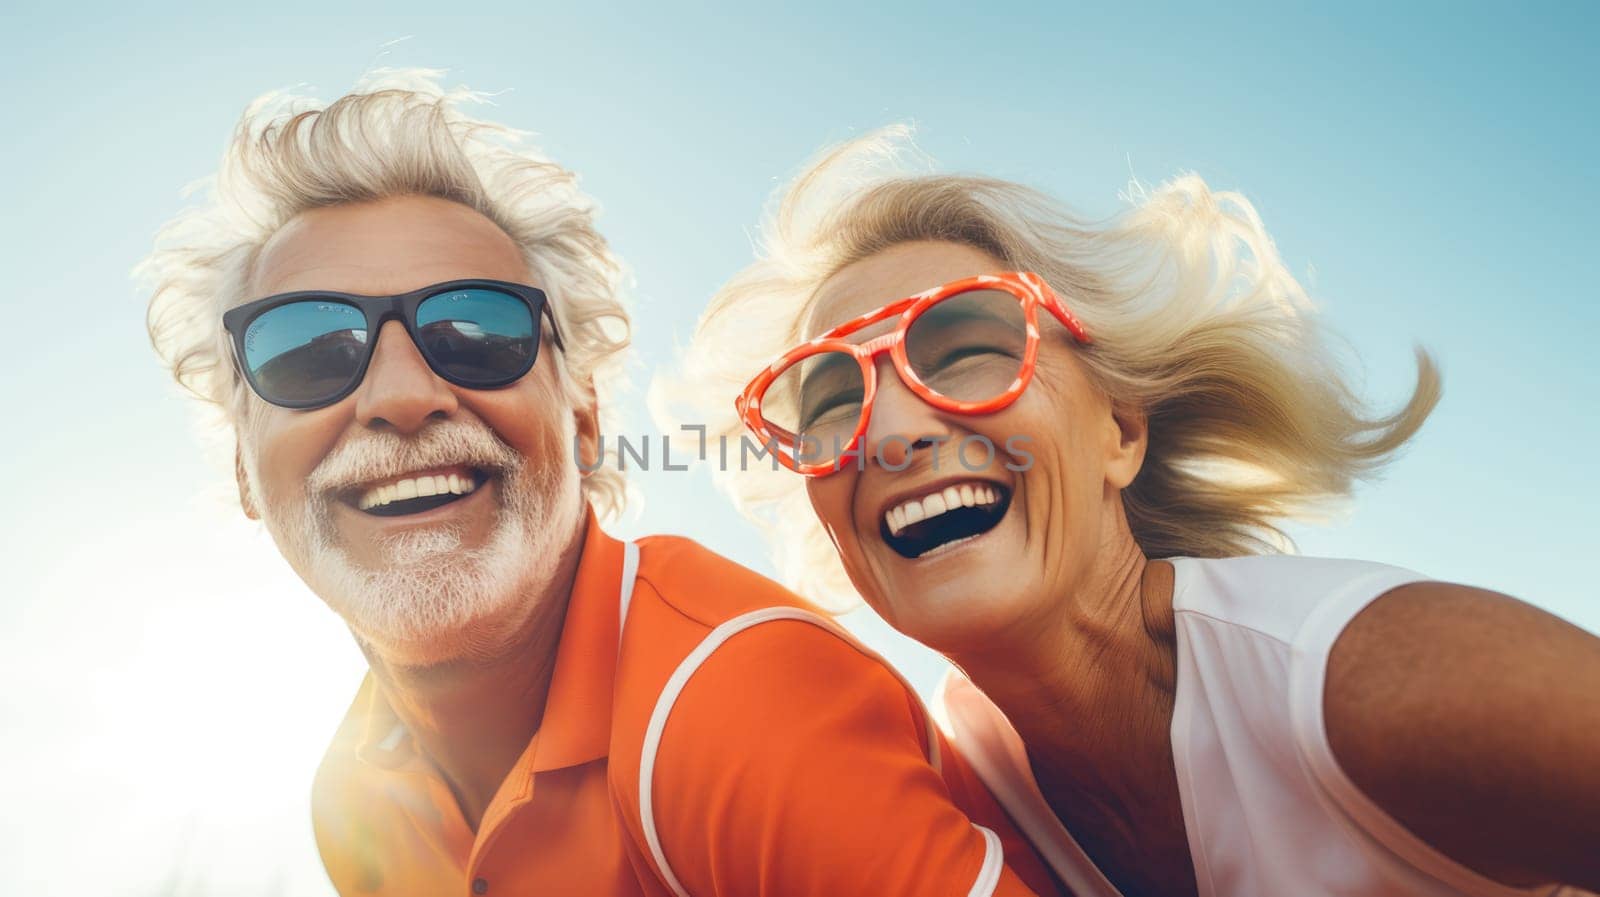 Happy elderly couple in smiling on sunny day, enjoying life after retirement together.